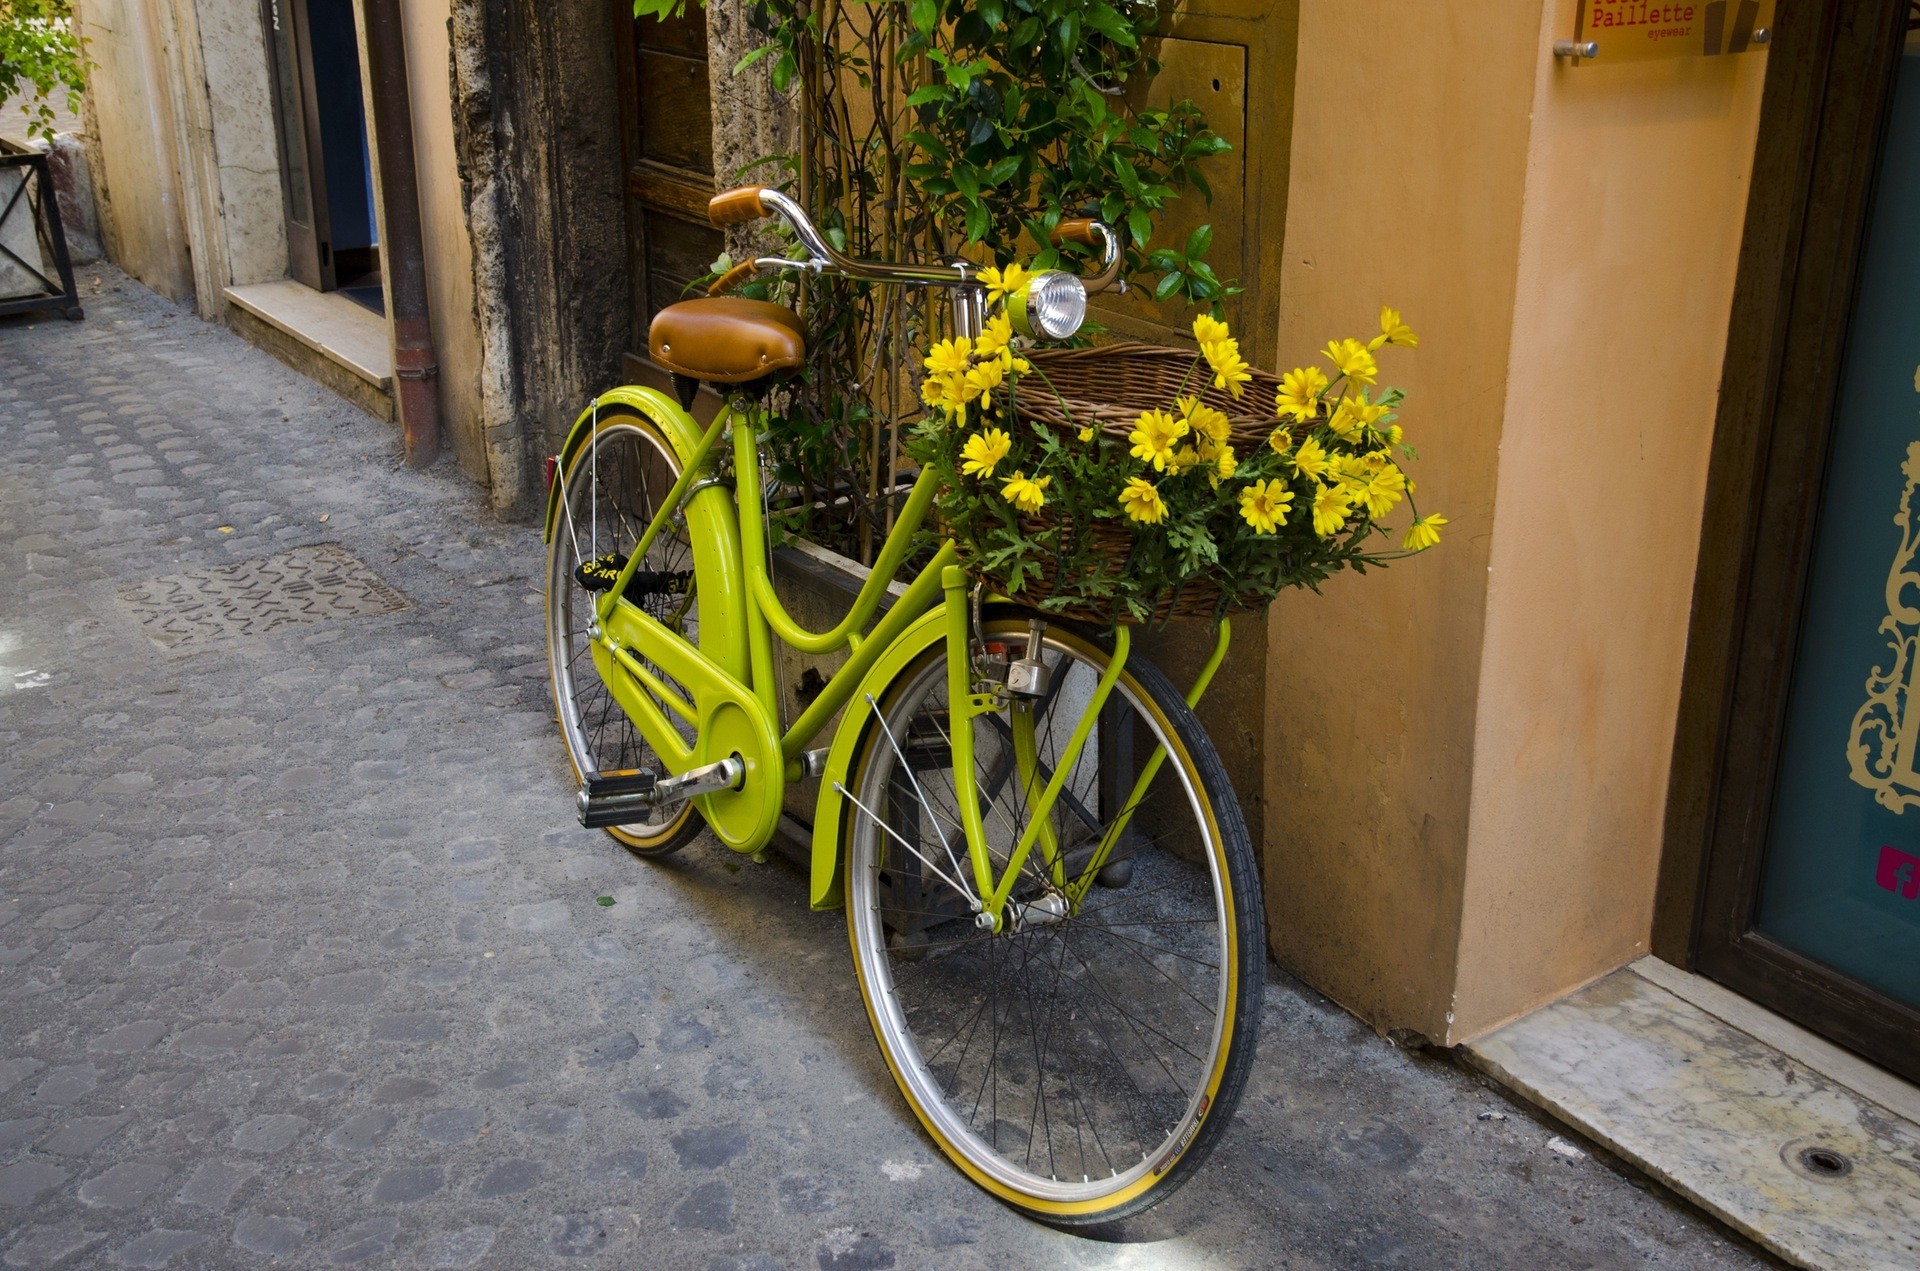  A yellow bicycle. Bicycles could be a primary form of transport in our future society.